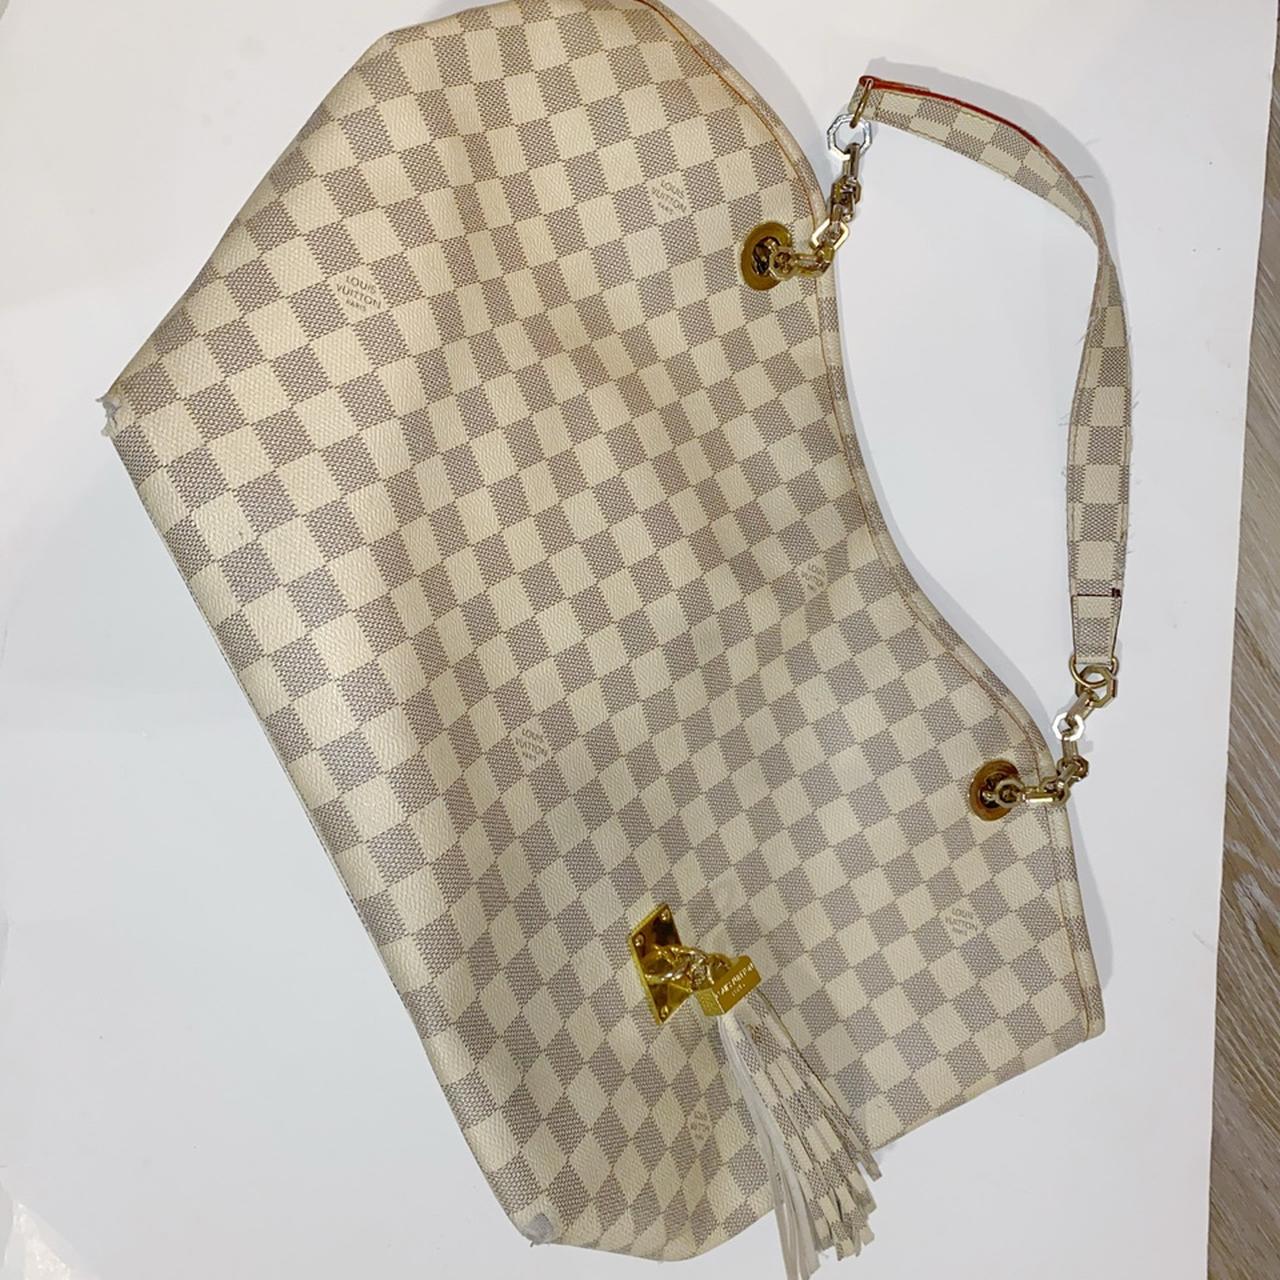 Authentic Louis Vuitton Neverfull. Purchased 10 - Depop